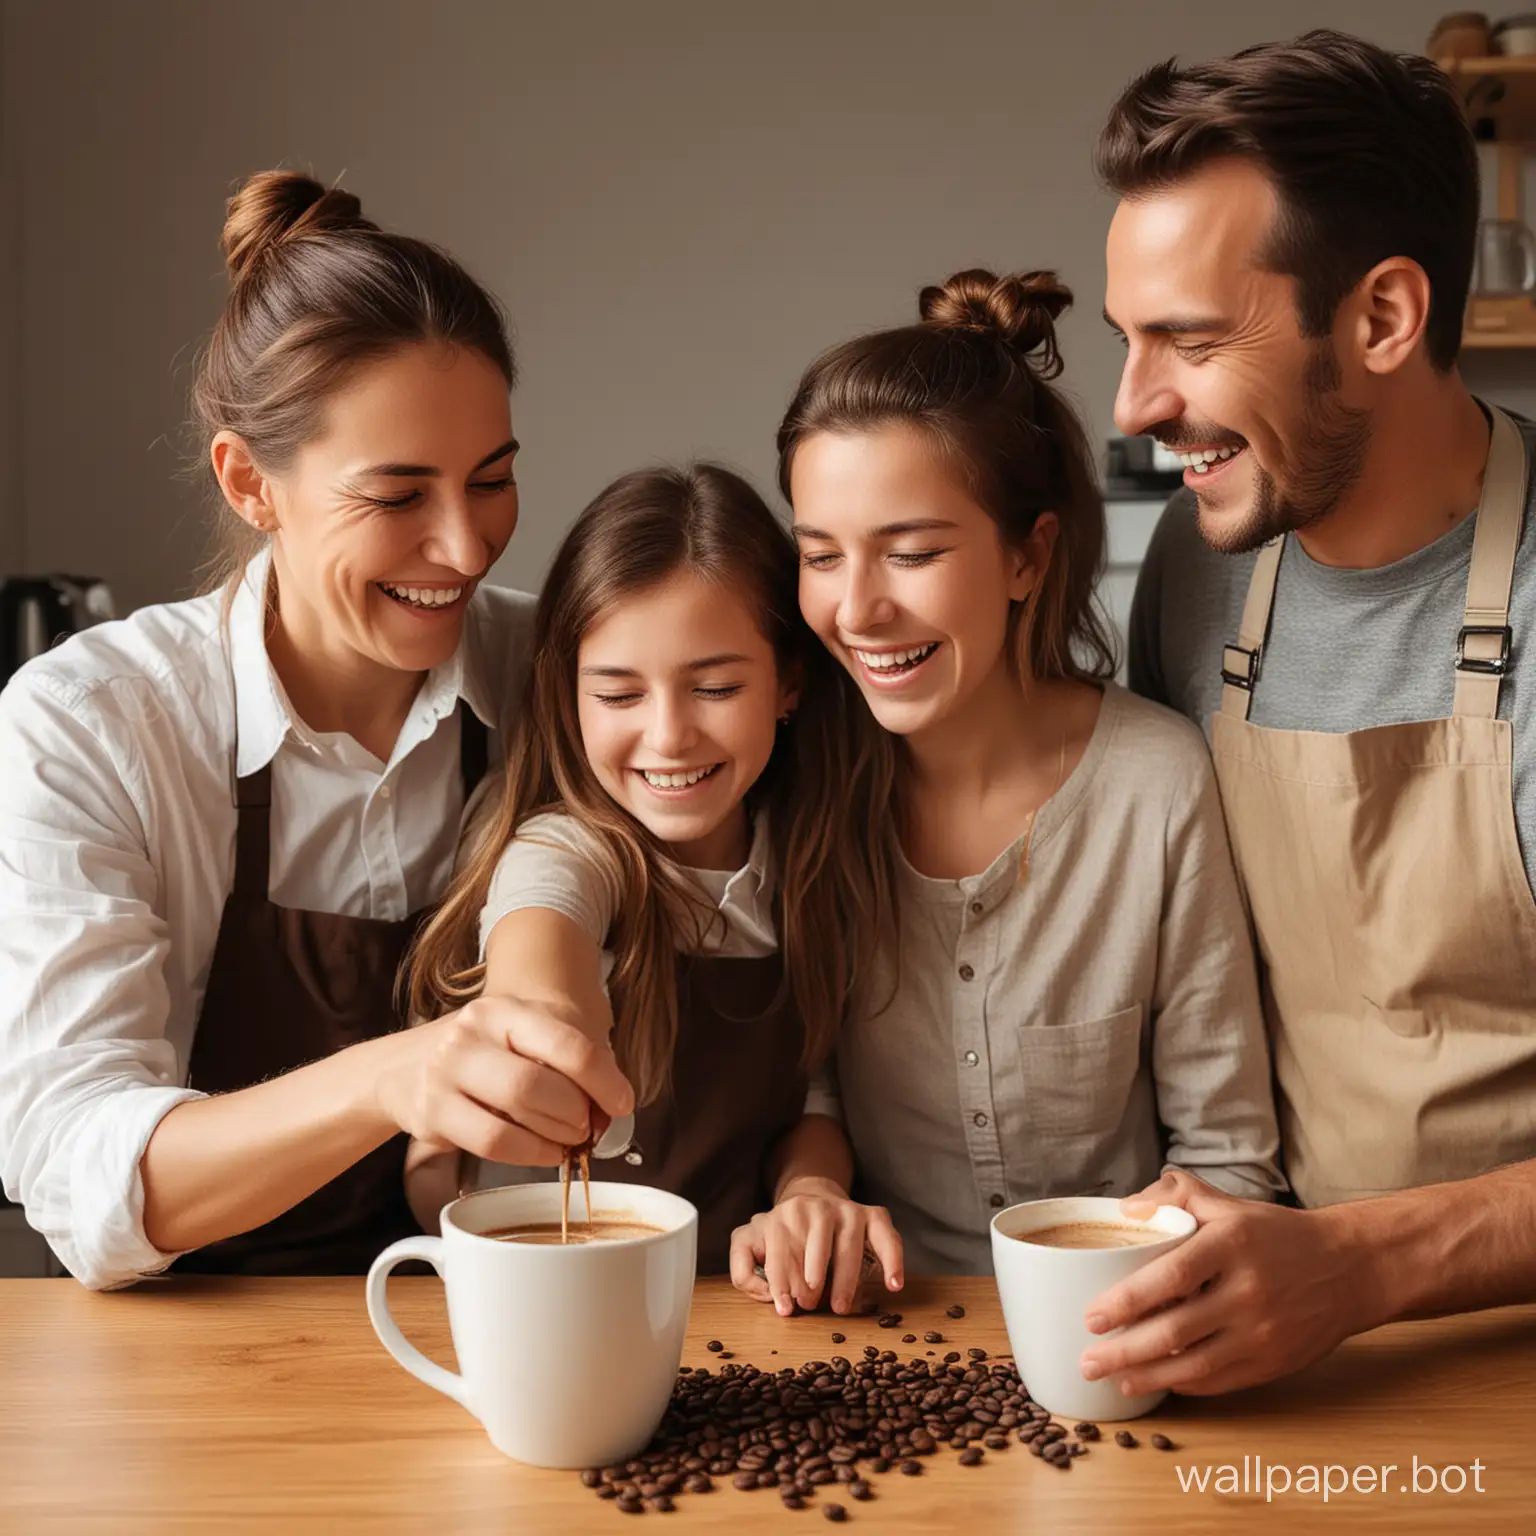 Generating a scene of a family of three, brewing coffee at home with laughter, the coffee should be brown.